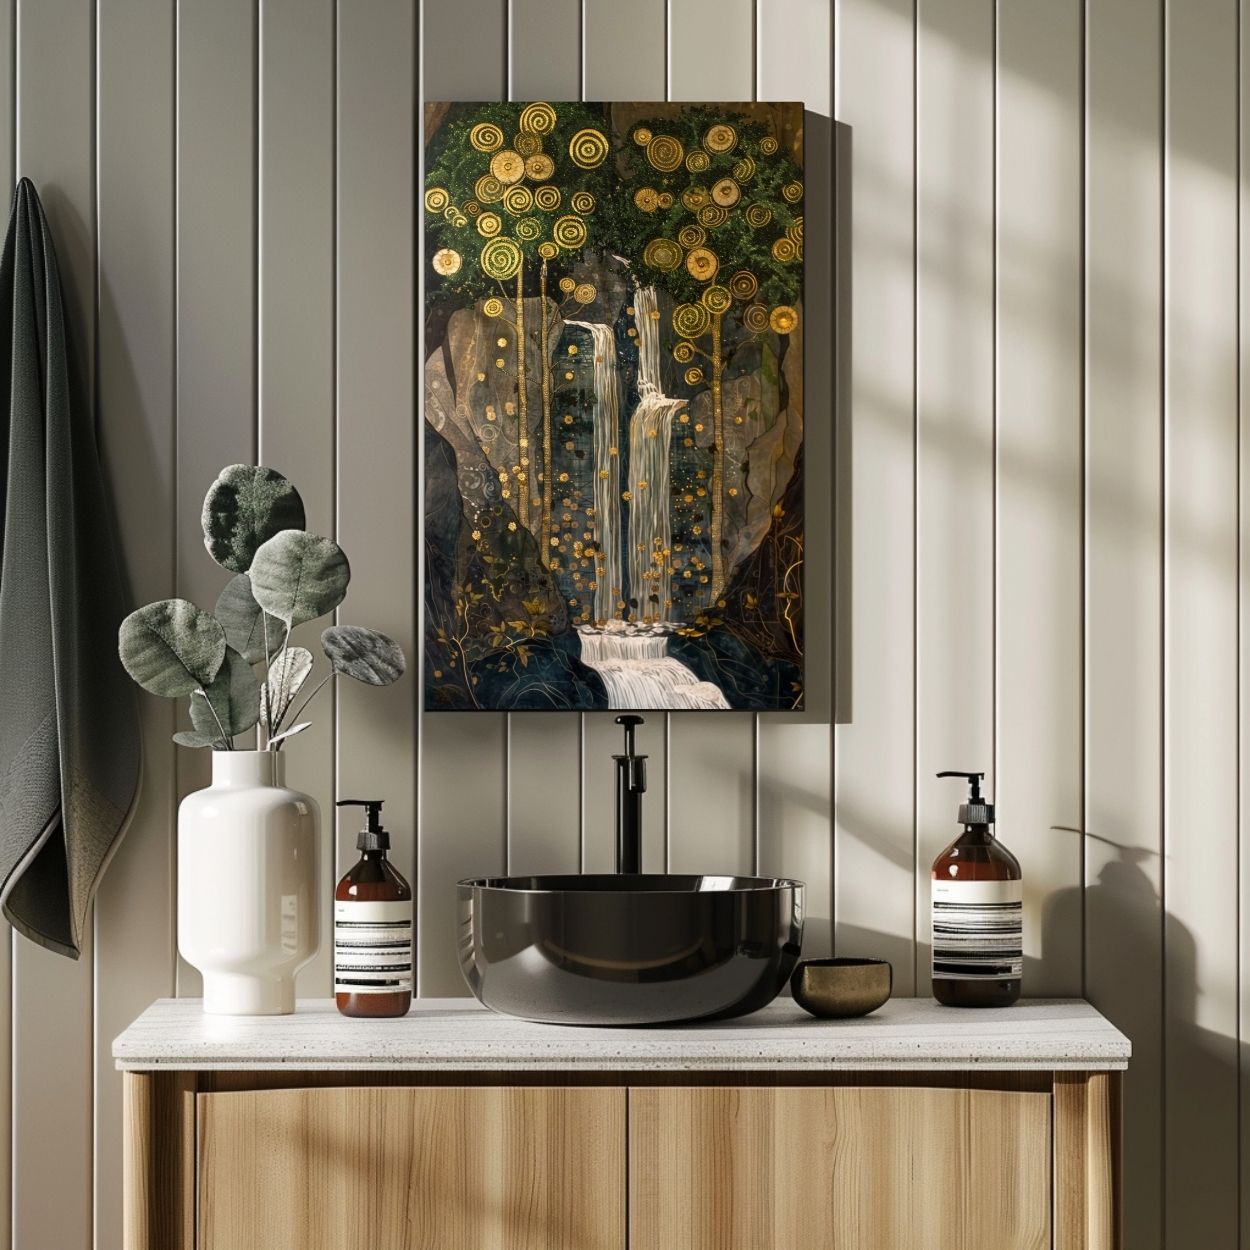 Product image of canvas print wall art featuring a waterfall surrounded by golden trees over a washbasin